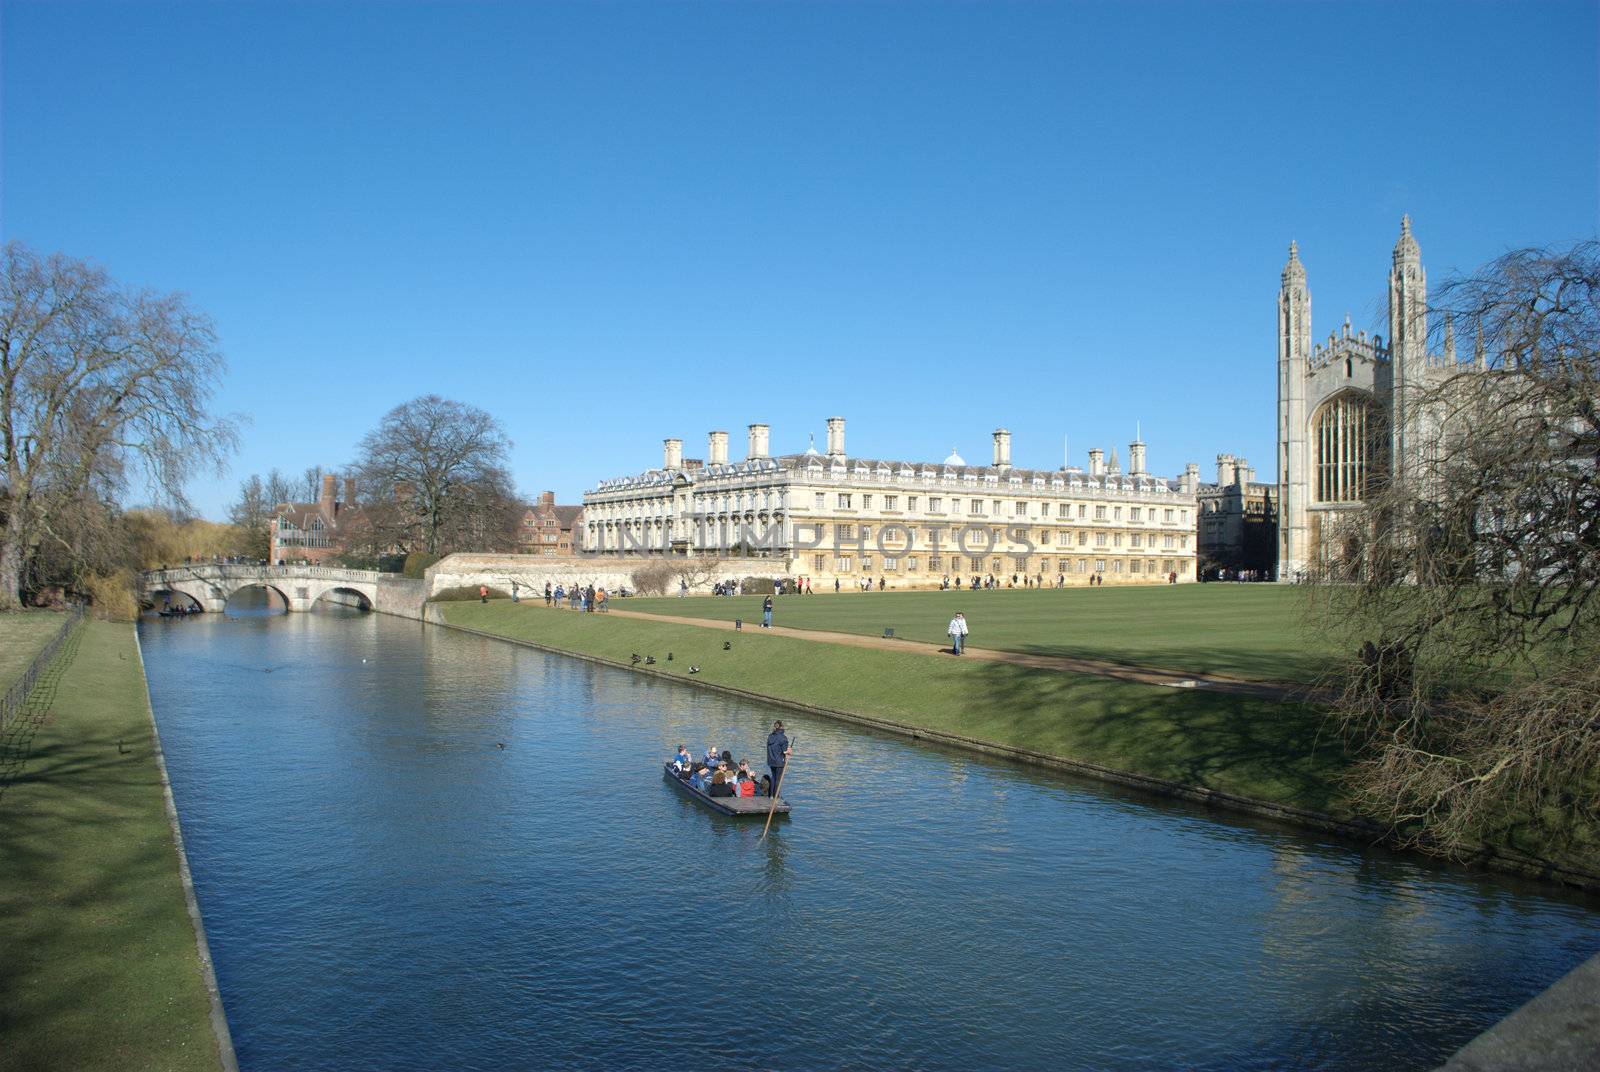 Kings college cambridge from back with punters